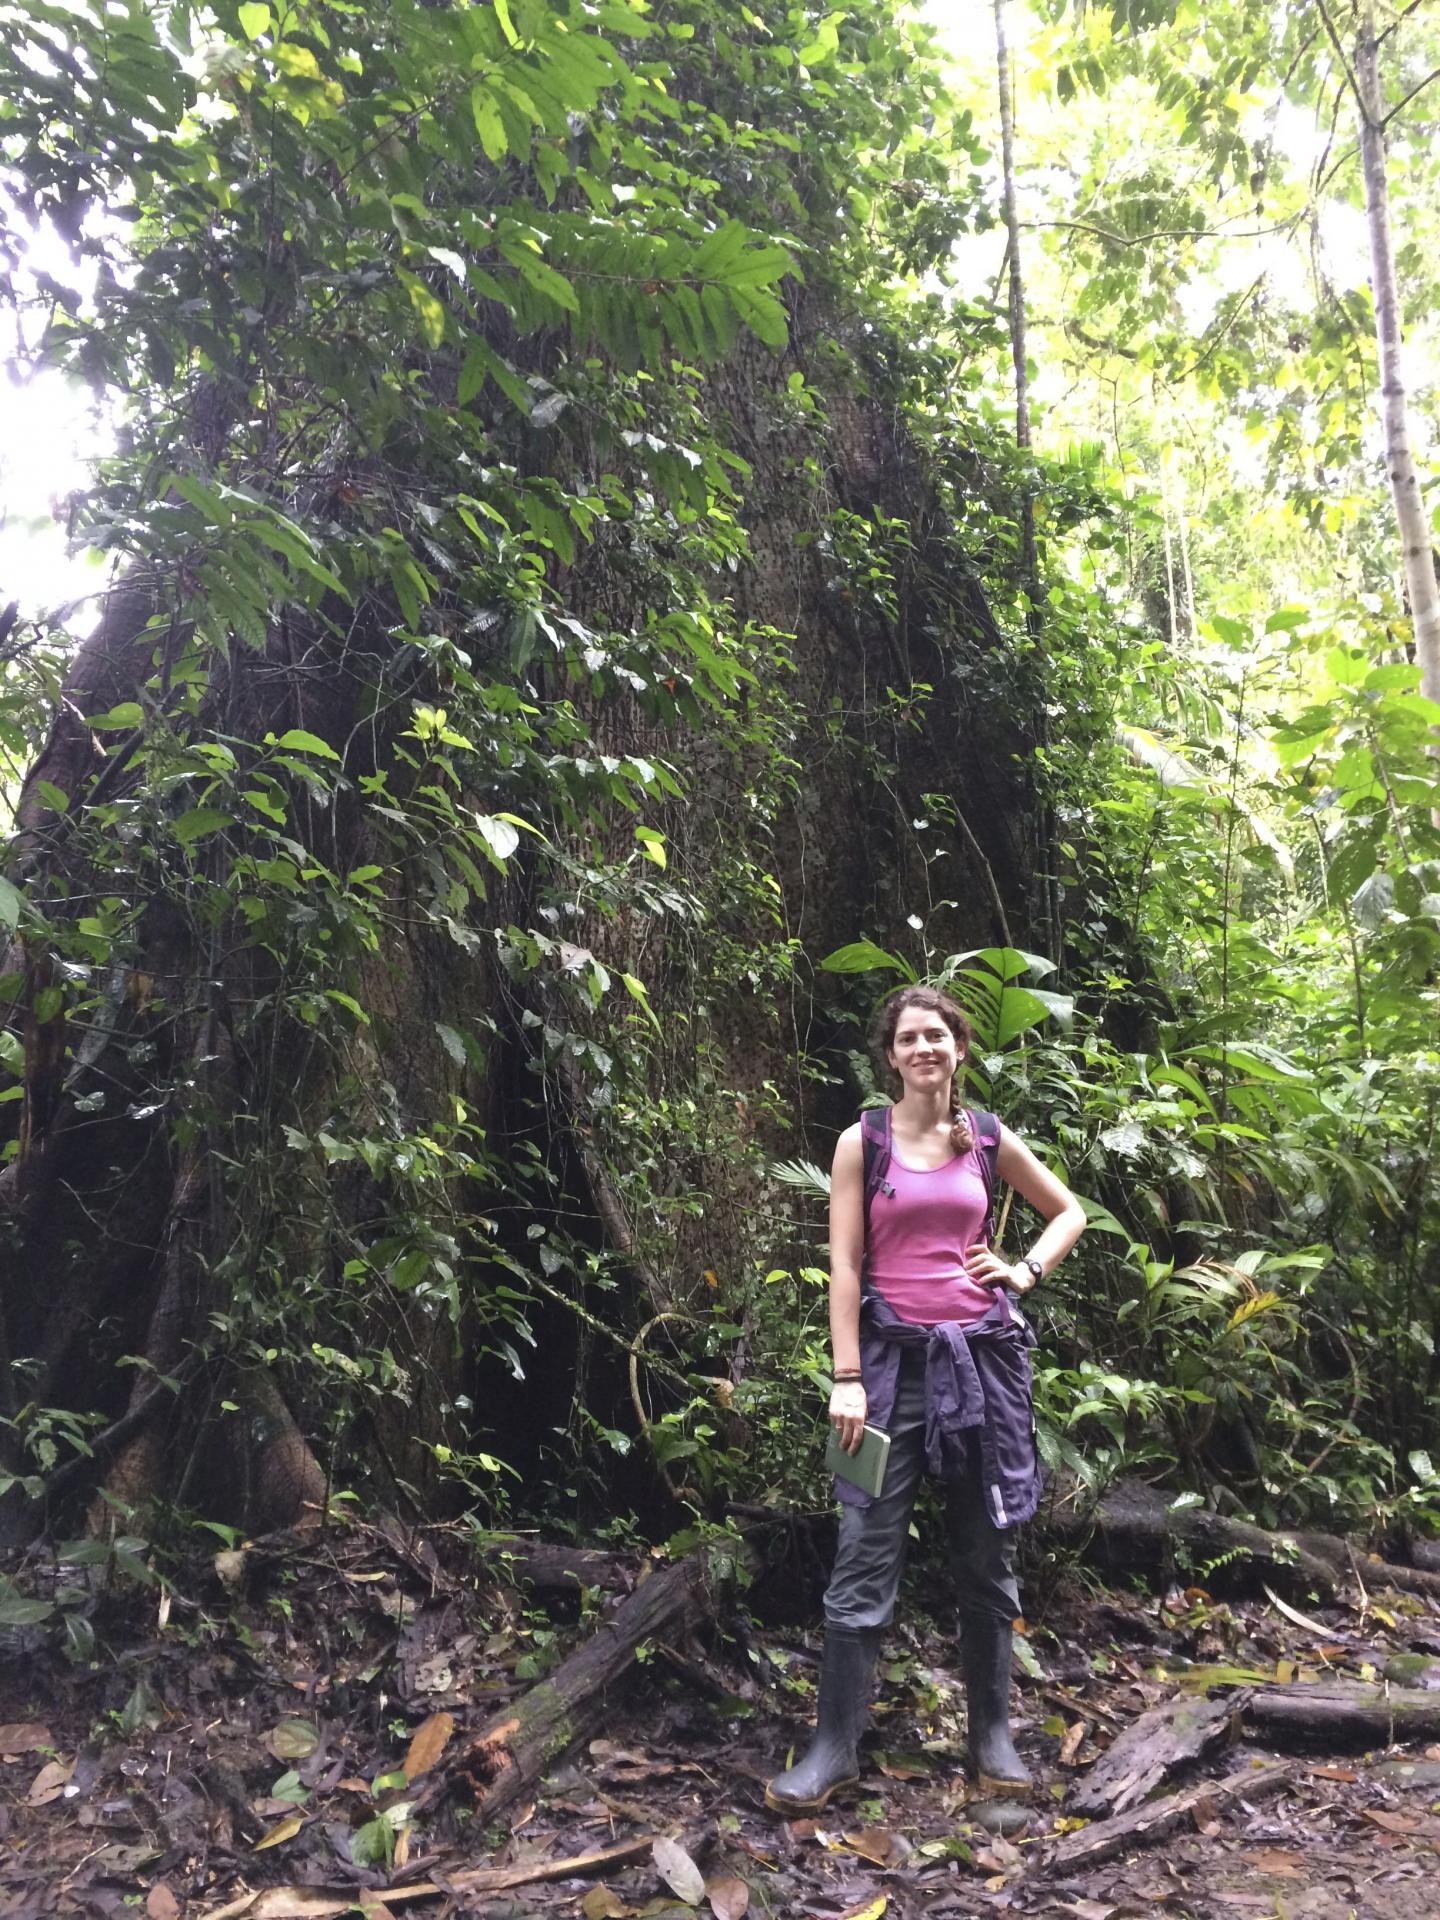 Young Explorer Studies Microbes and Plants in Galapagos